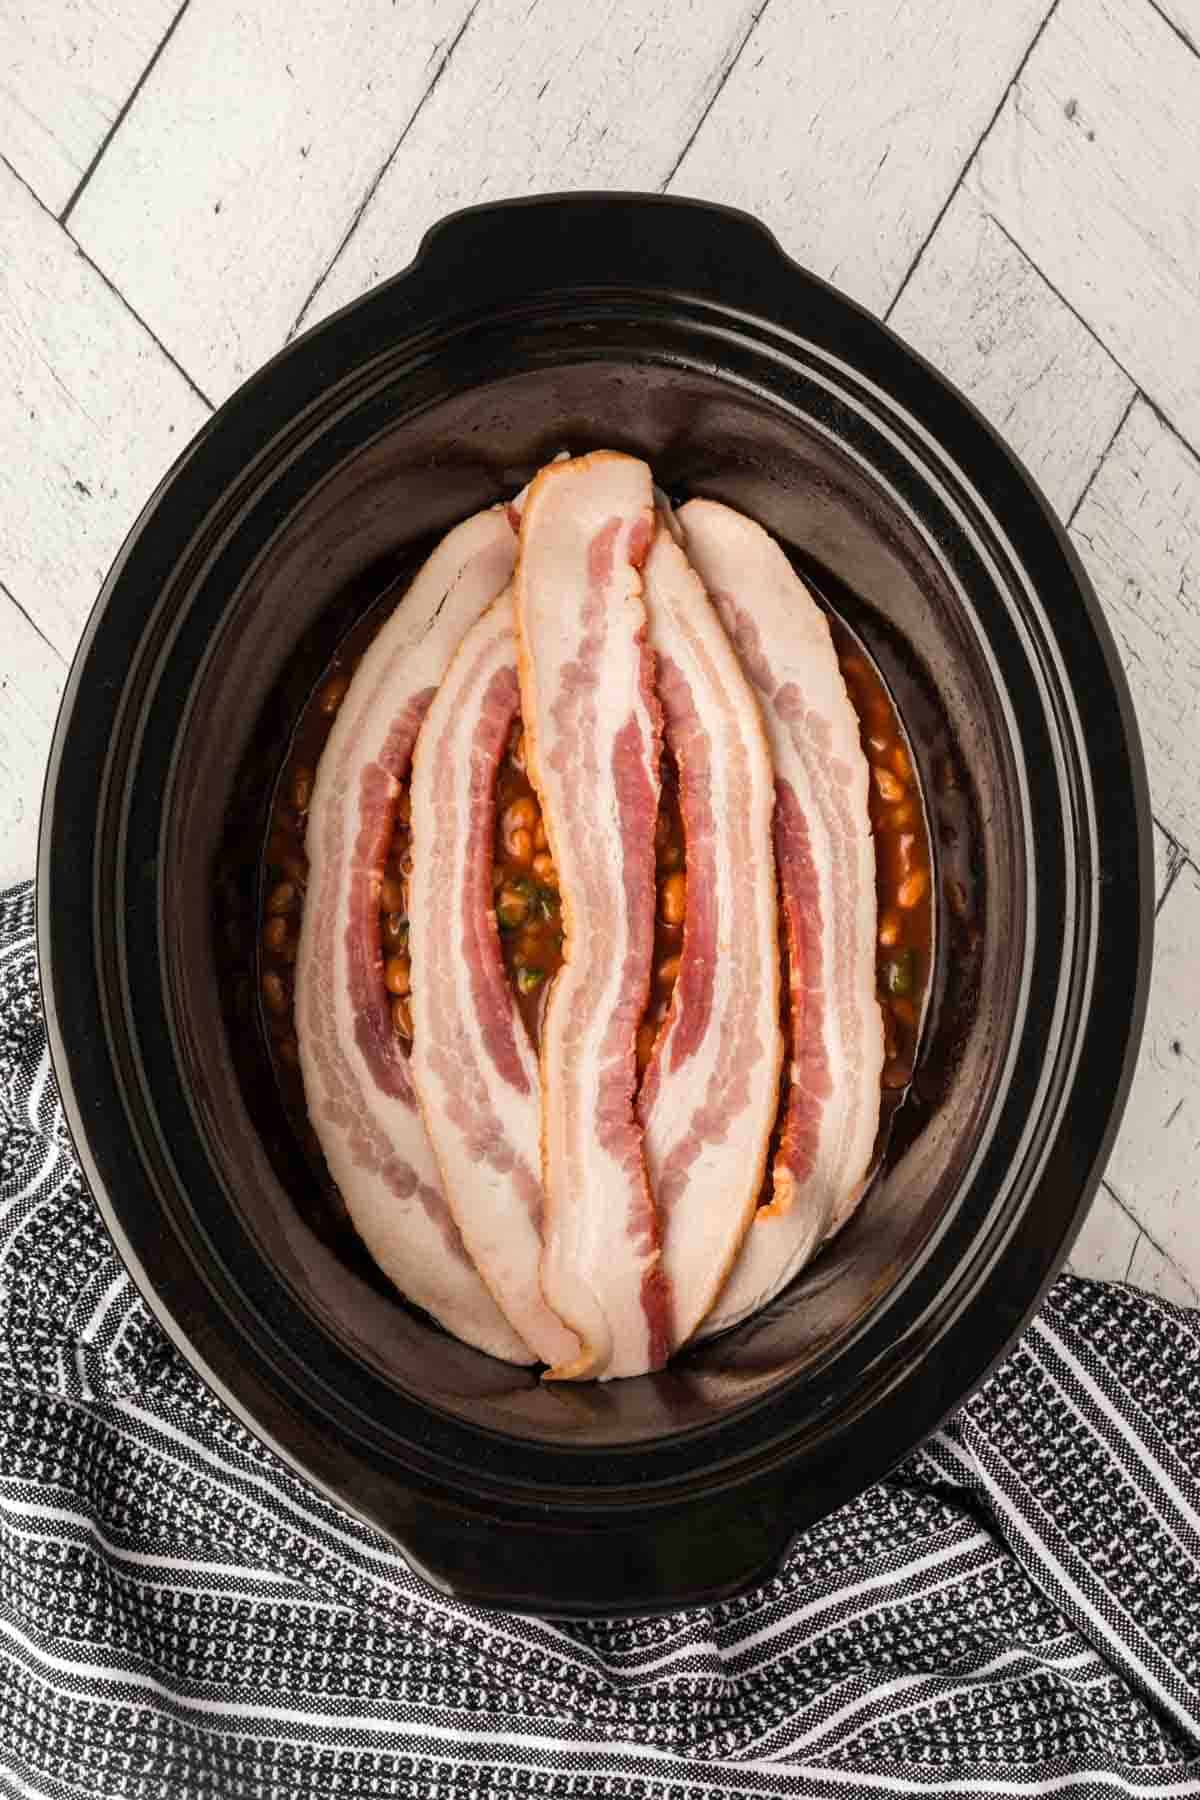 Placing the pork and beans mixture into the slow cooker and topping with strips of bacon